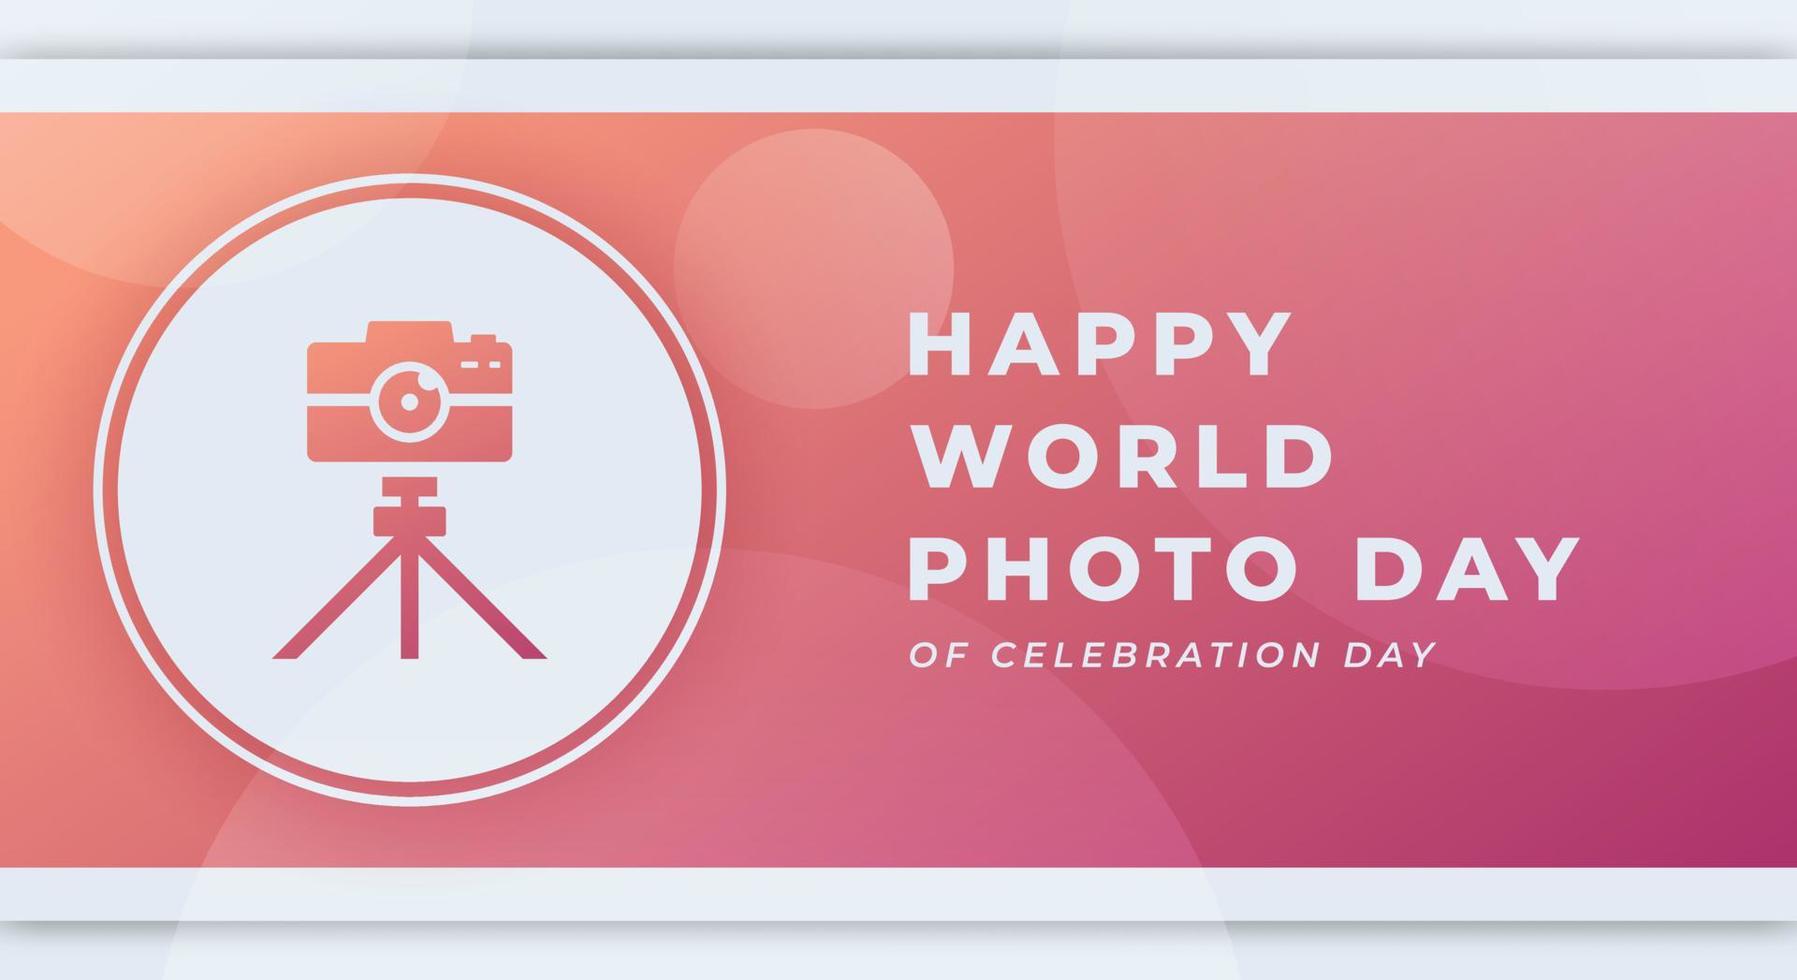 World Photo or Photography Day Celebration Vector Design Illustration for Background, Poster, Banner, Advertising, Greeting Card